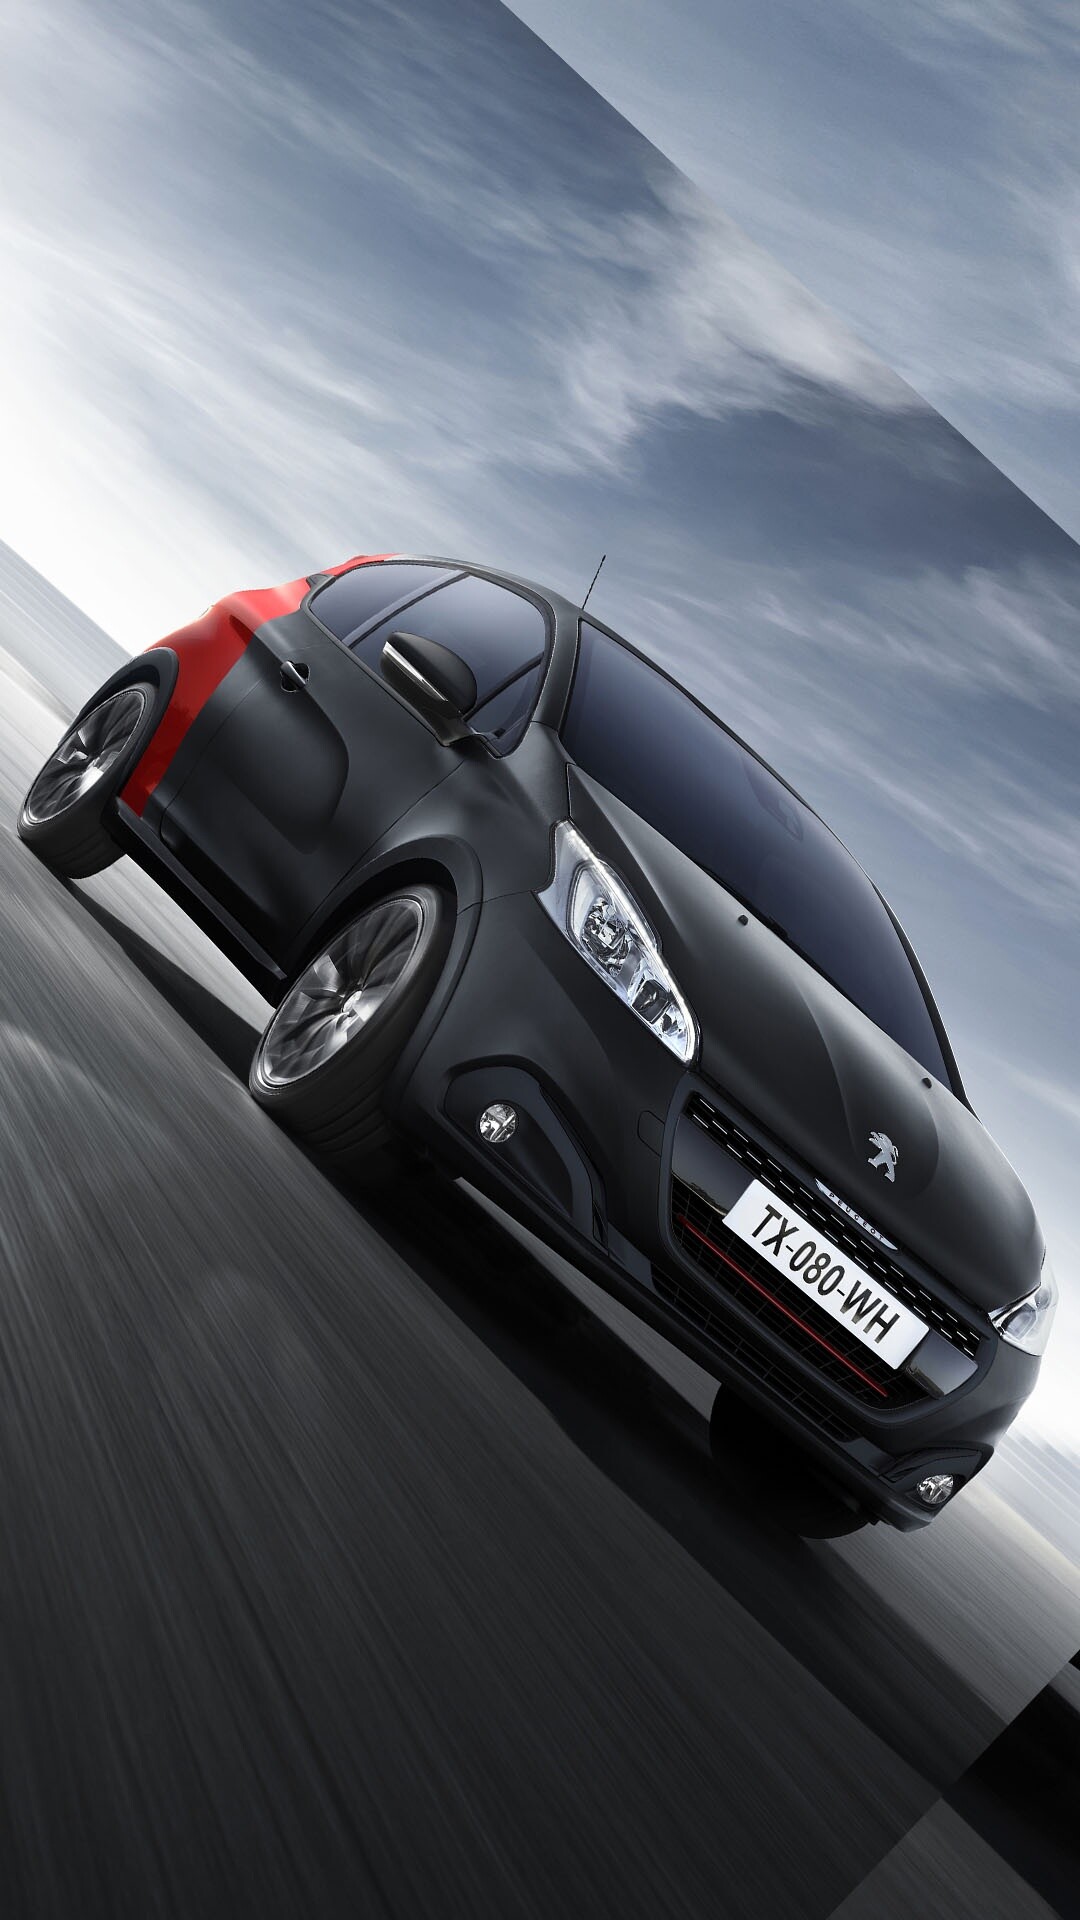 Peugeot: The model 208GTi won a one-two-three at the 24 Hours Nürburgring endurance race in 2013. 1080x1920 Full HD Wallpaper.